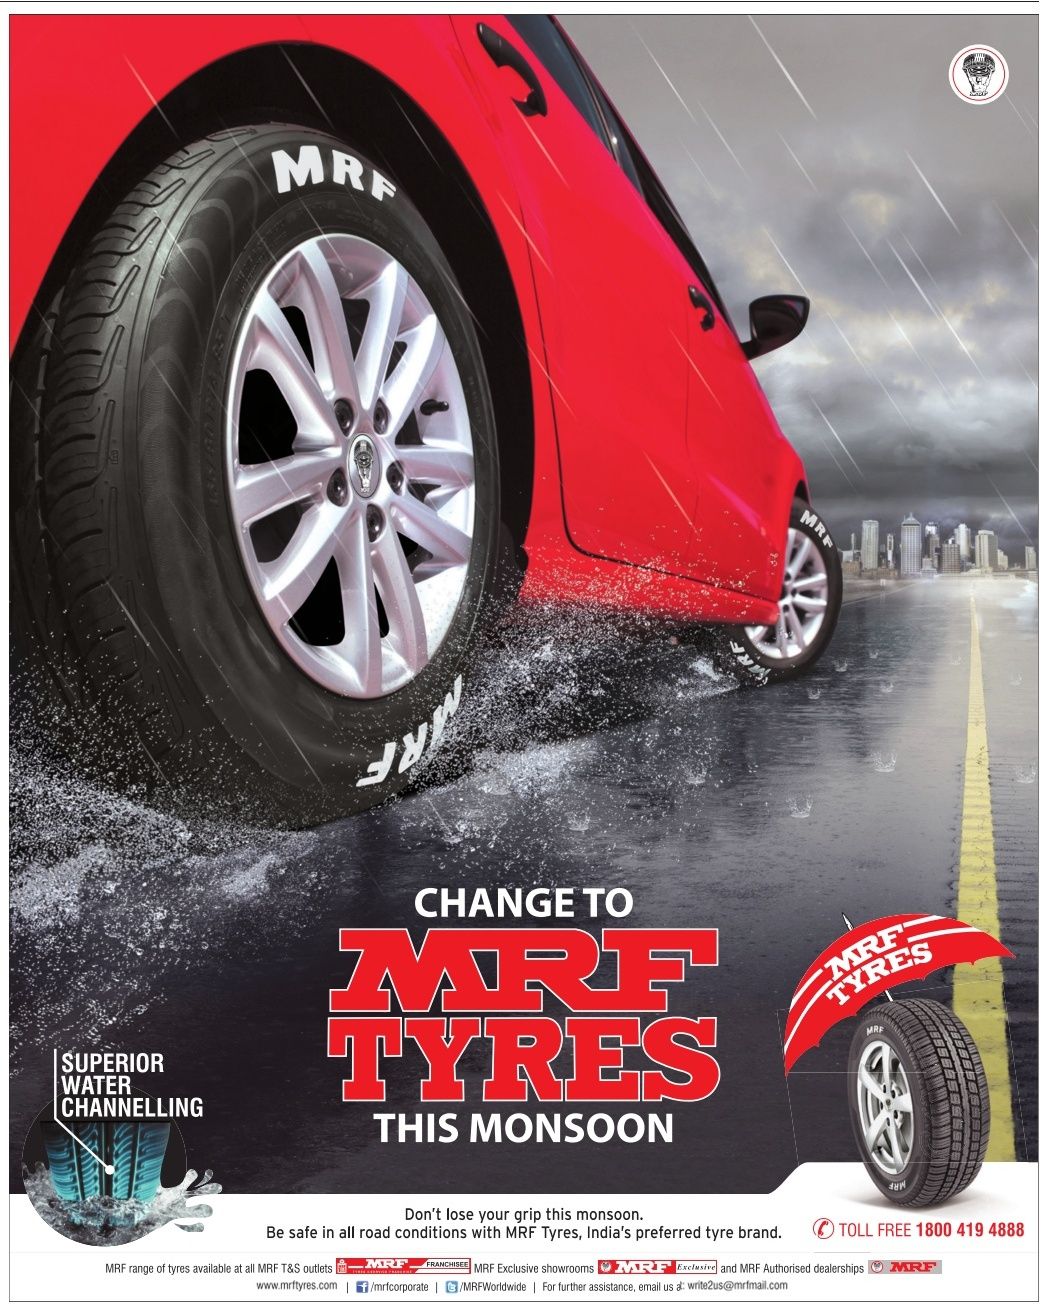 An Inspiring Journey Of India's Tyre Giants- MRF